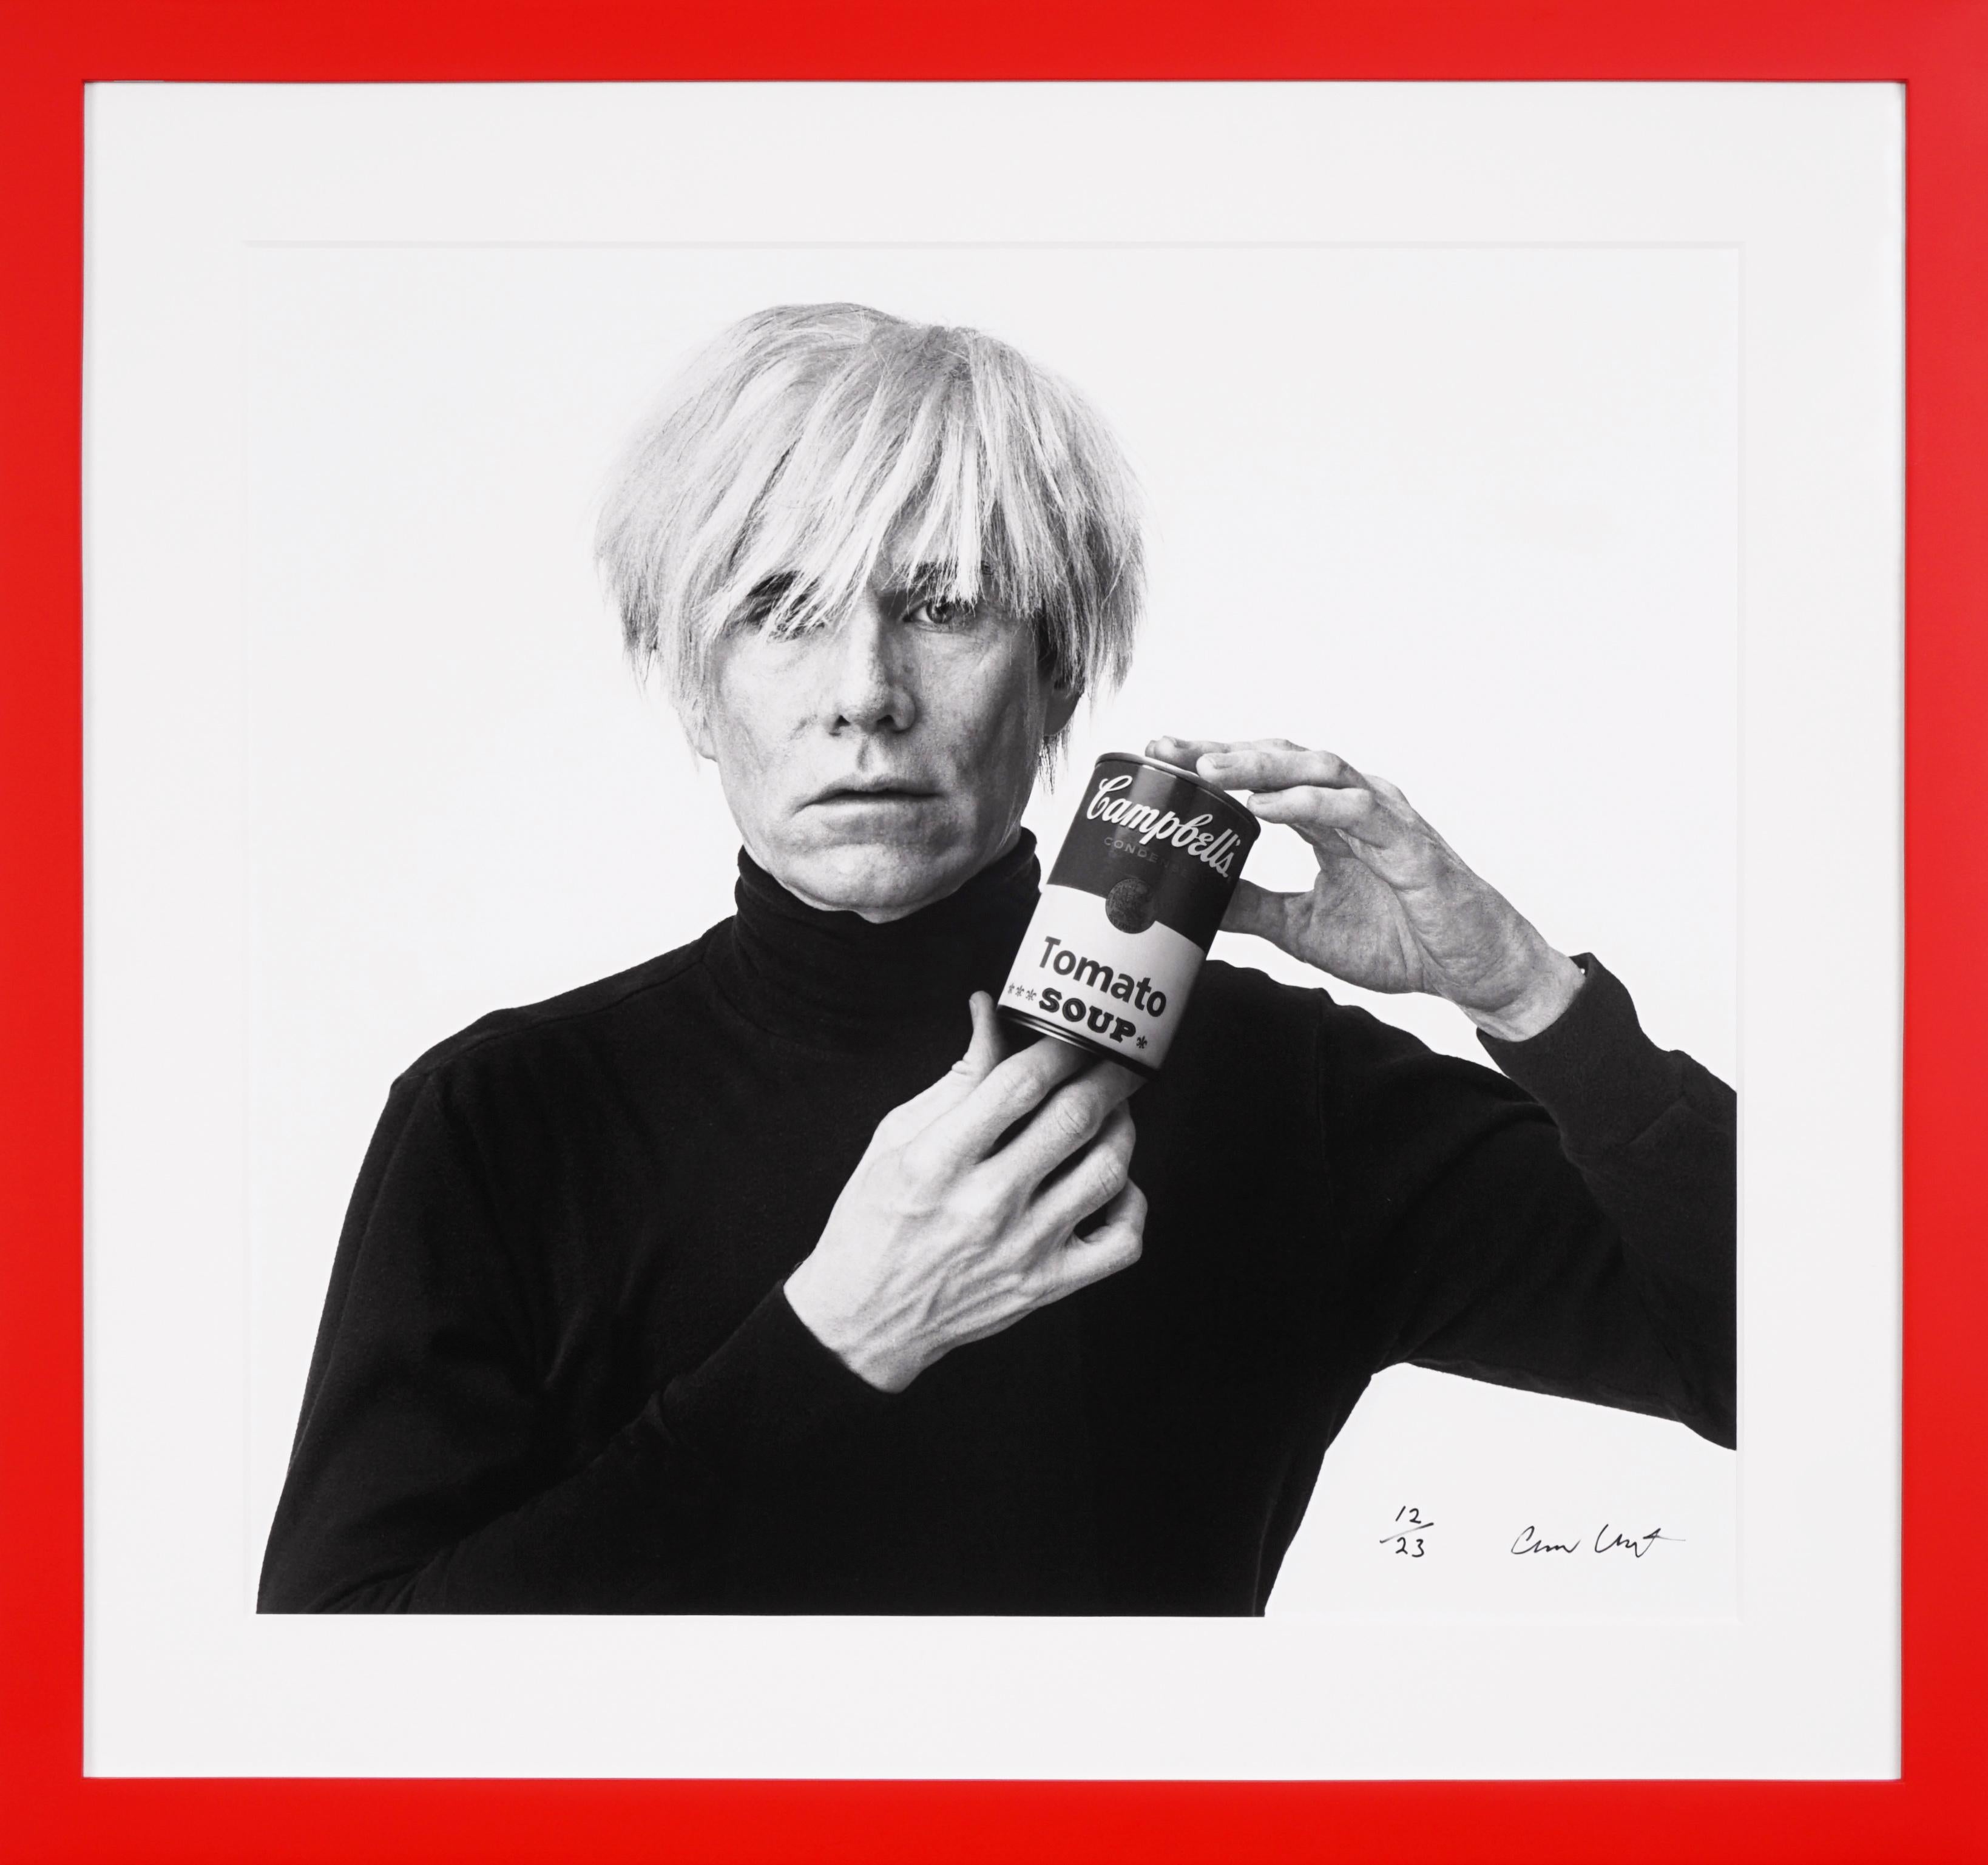 Andrew Unangst, archive "Andy Warhol with Red Campbell's Soup", 2020